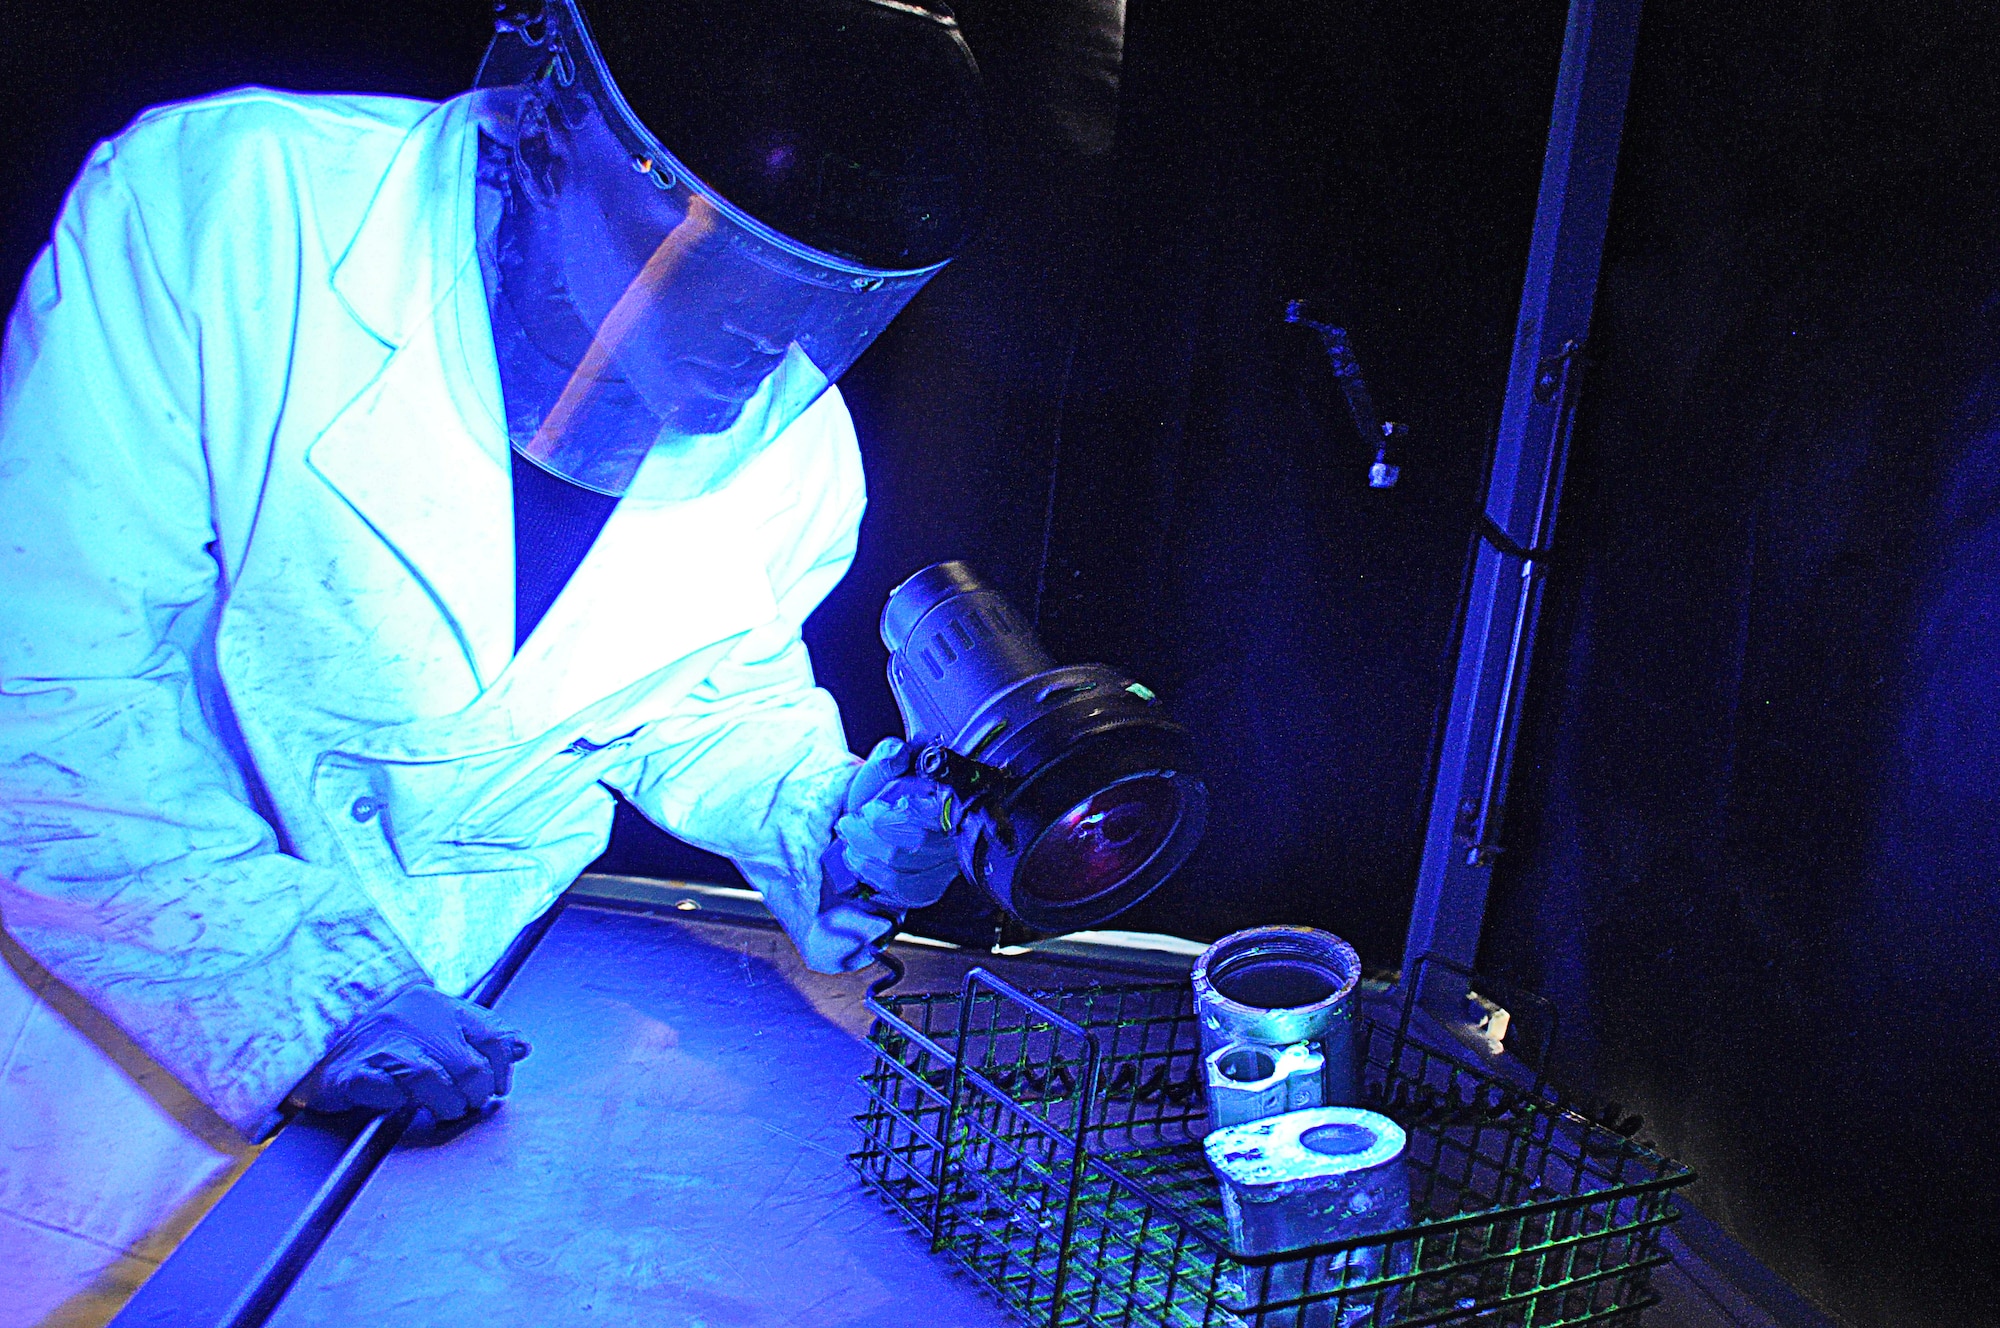 Tech. Sgt. Steven Smith, 507th Air Refueling Wing non-destructive inspection lab shop chief inspects parts off a KC-135 Stratotanker during the final stage of a penetrant test.  The black light shows any cracks that are not visible to the human eye.  The NDI lab inspects about 300 parts either in the lab or with their portable units every month.  (U.S. Air Force photo by Senior Airman Mark Hybers)